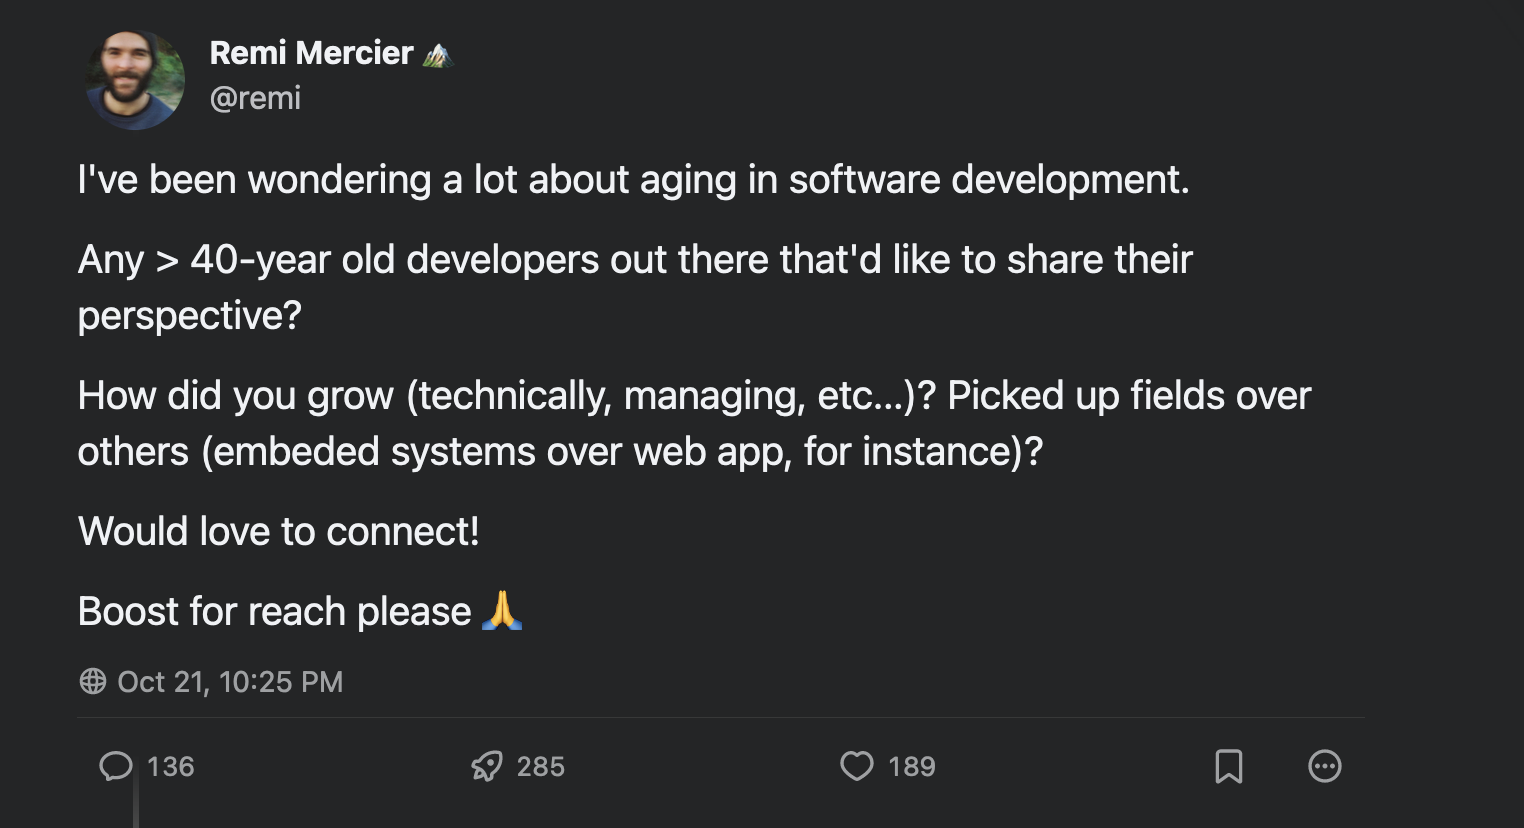 a screenshot of a Mastodon toot with me asking: I've been wondering a lot about aging in software development. Any > 40-year old developers out there that'd like to share their perspective? How did you grow (technically, managing, etc...)? Picked up fields over others (embeded systems over web app, for instance)?